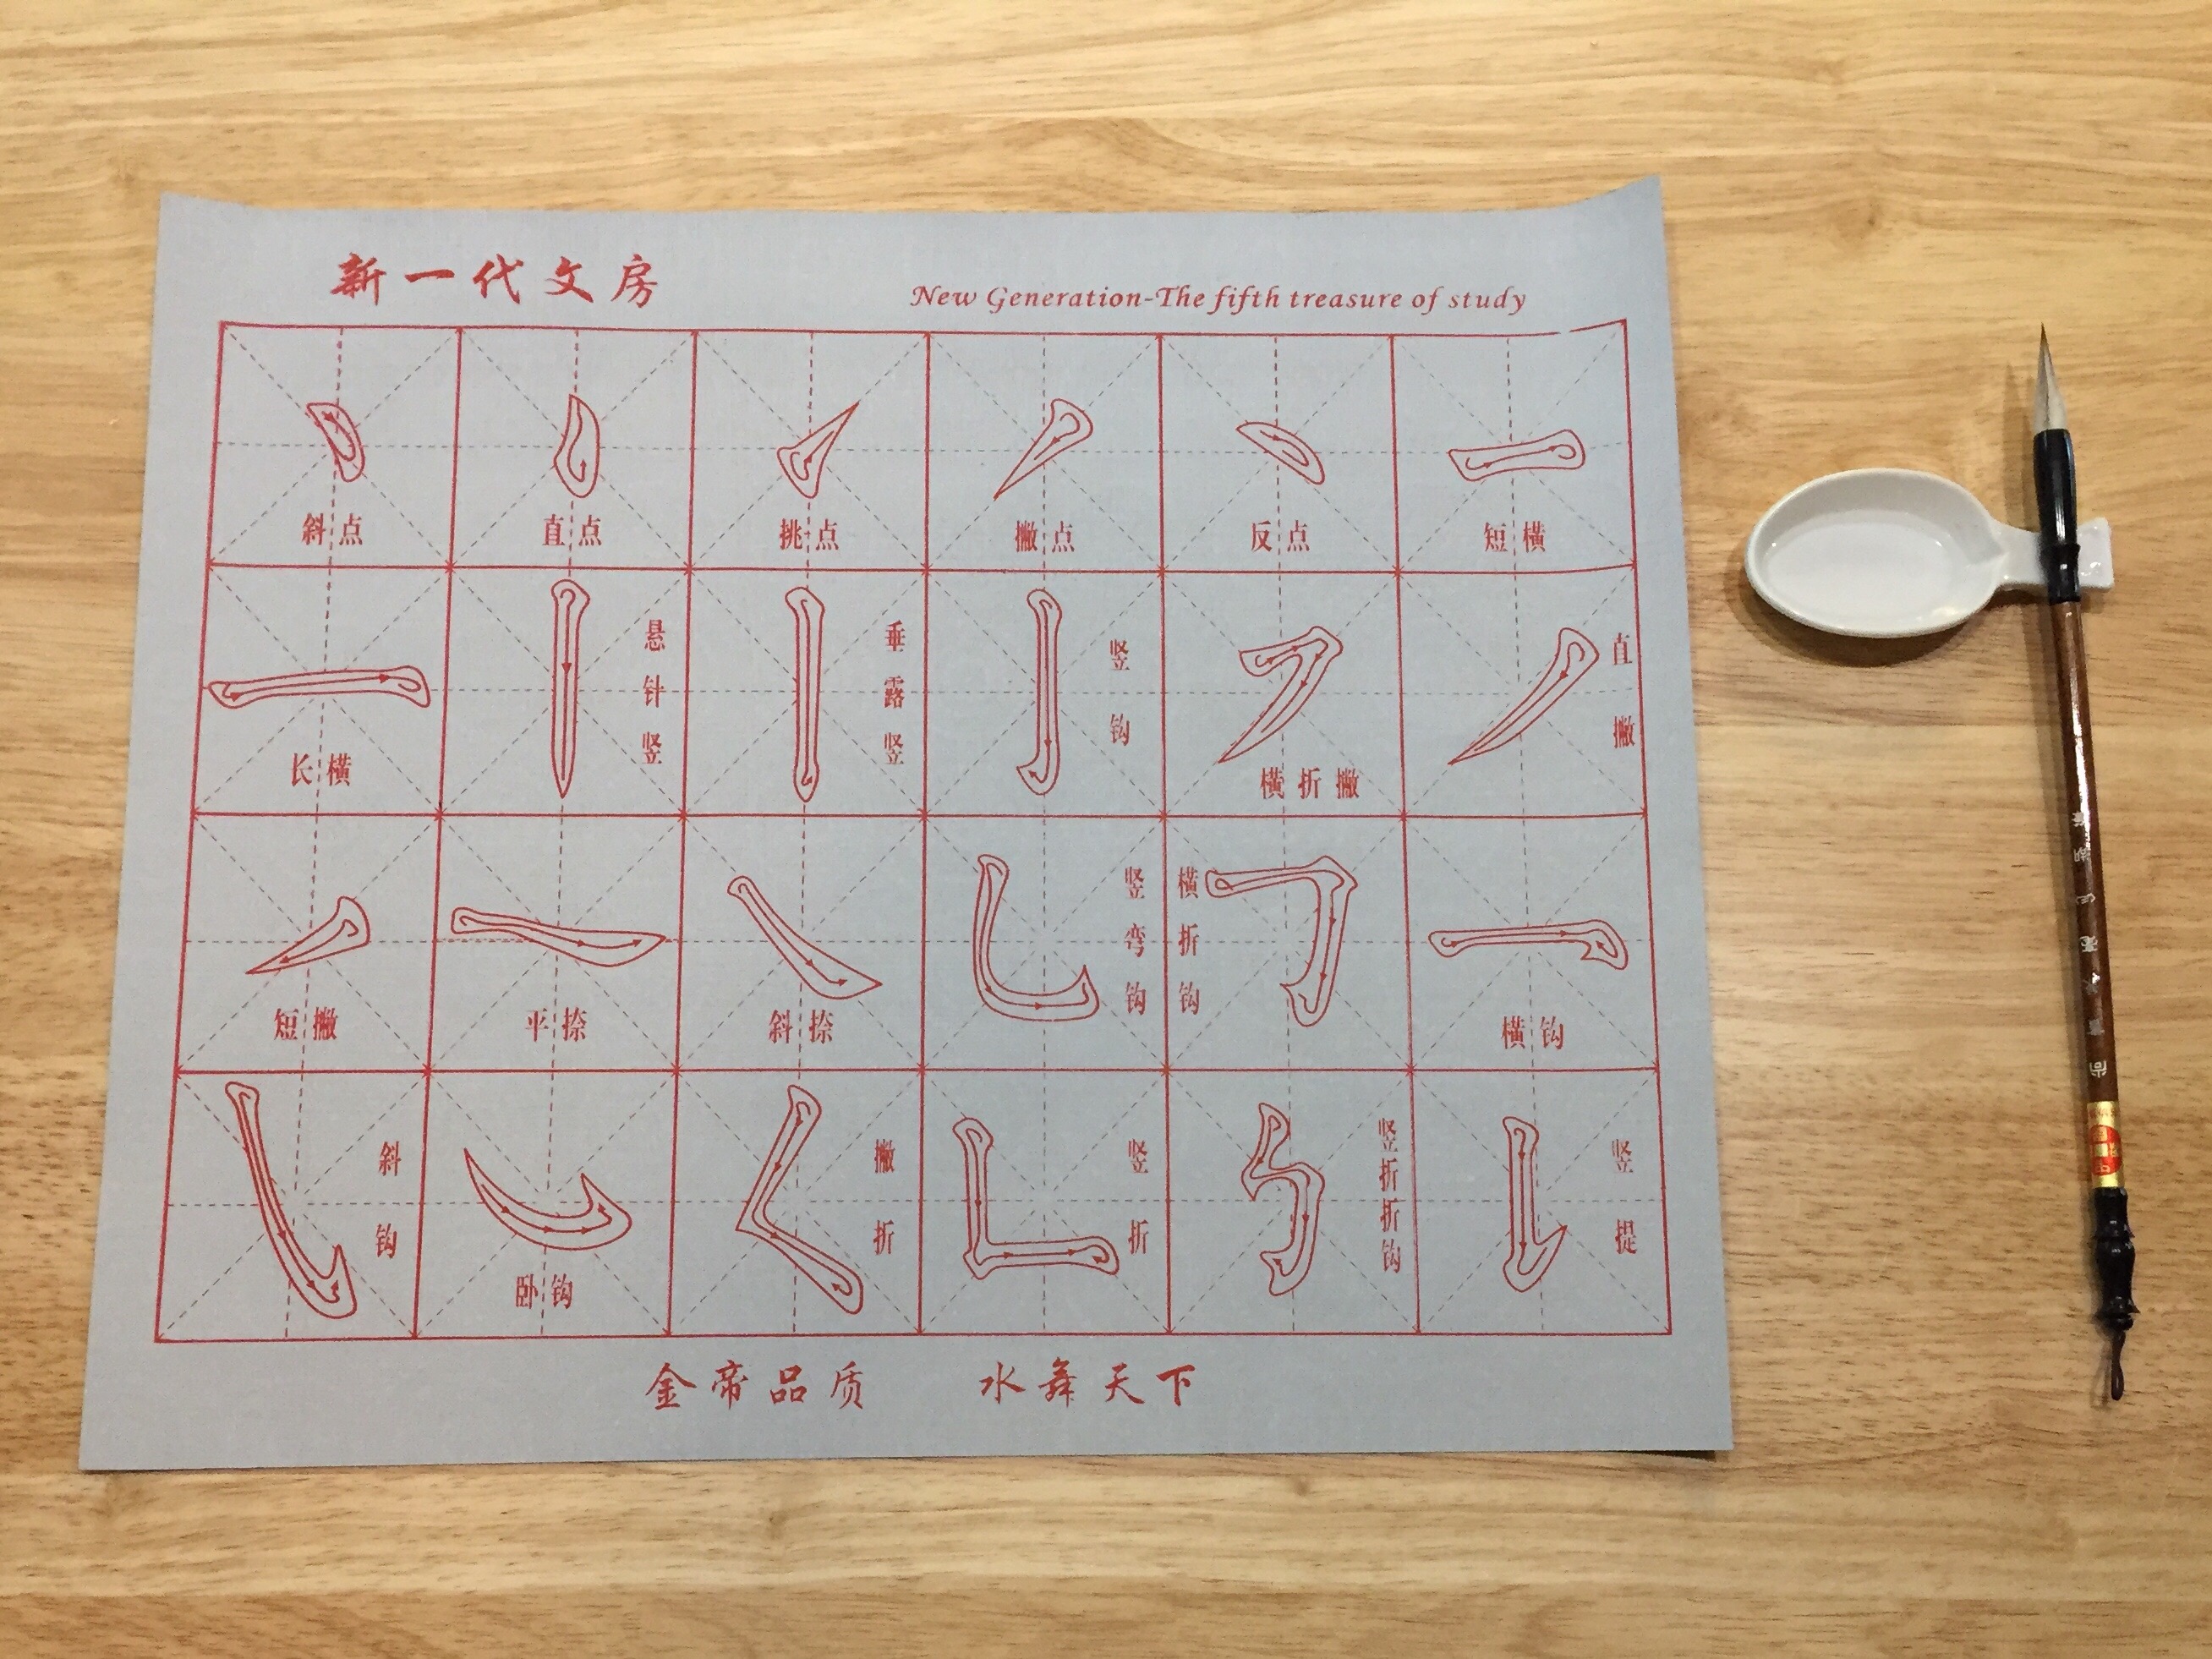 Chinese Calligraphy for Kids – Hands-On Chinese Fun!